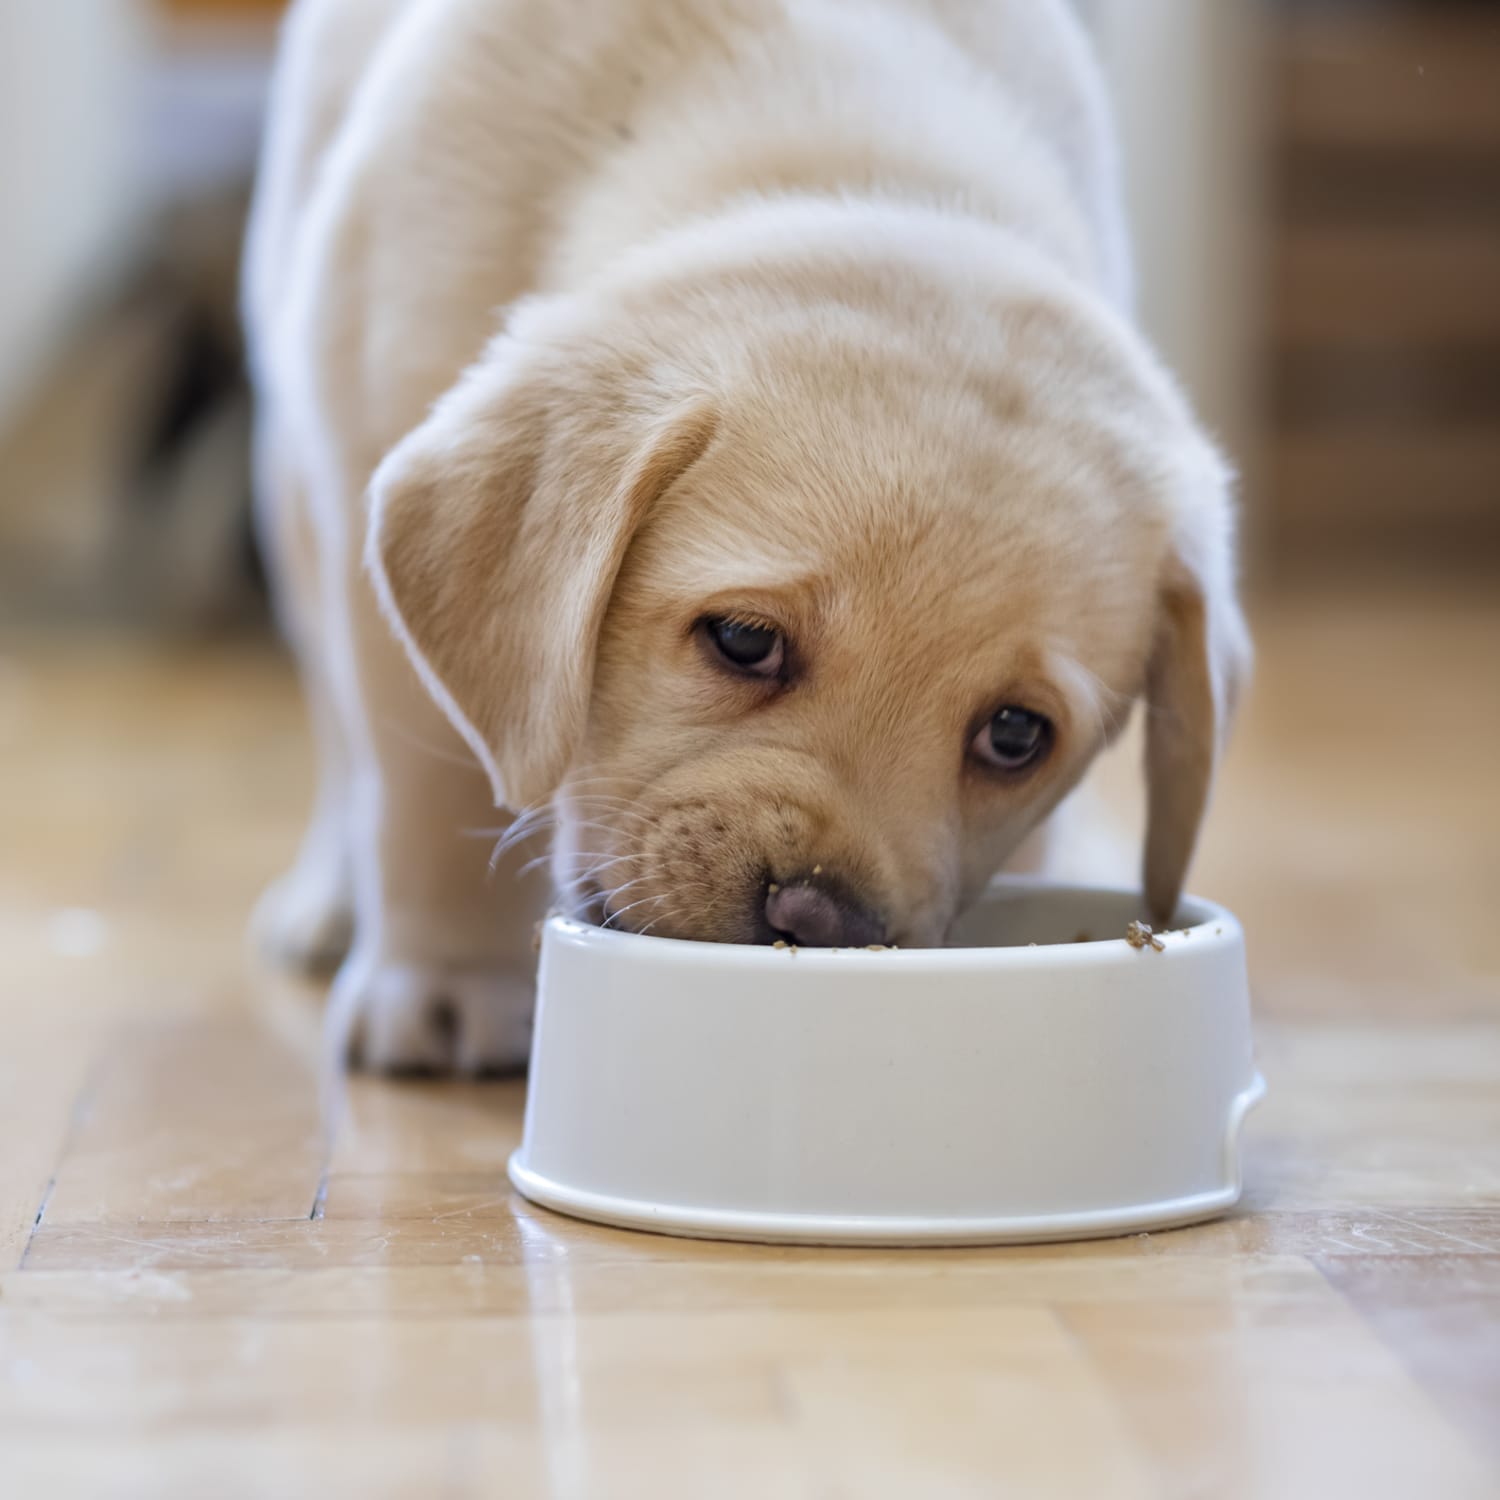 WeatherTech's Feeding System Improves Mealtime for Pets